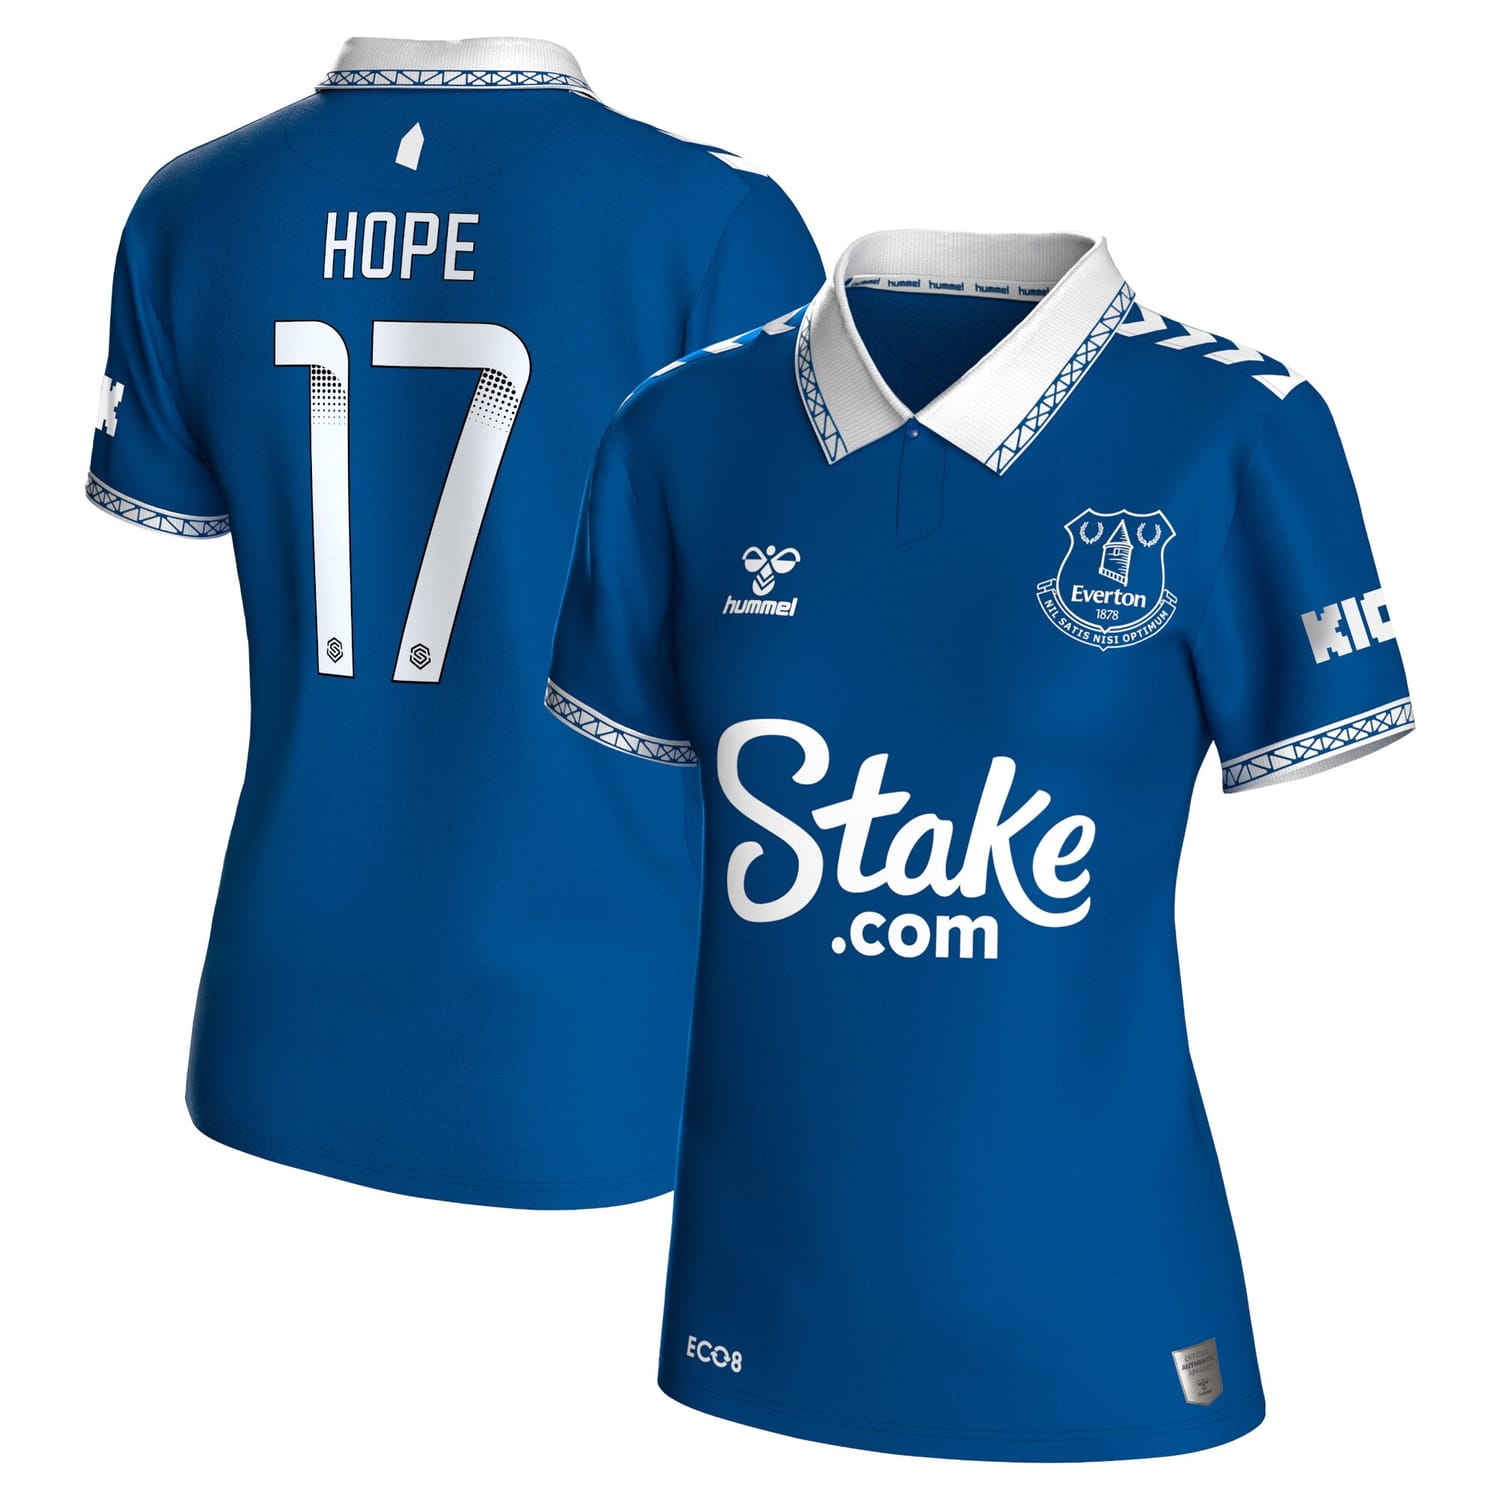 Premier League Everton Home WSL Jersey Shirt 2023-24 player Lucy Hope printing for Women